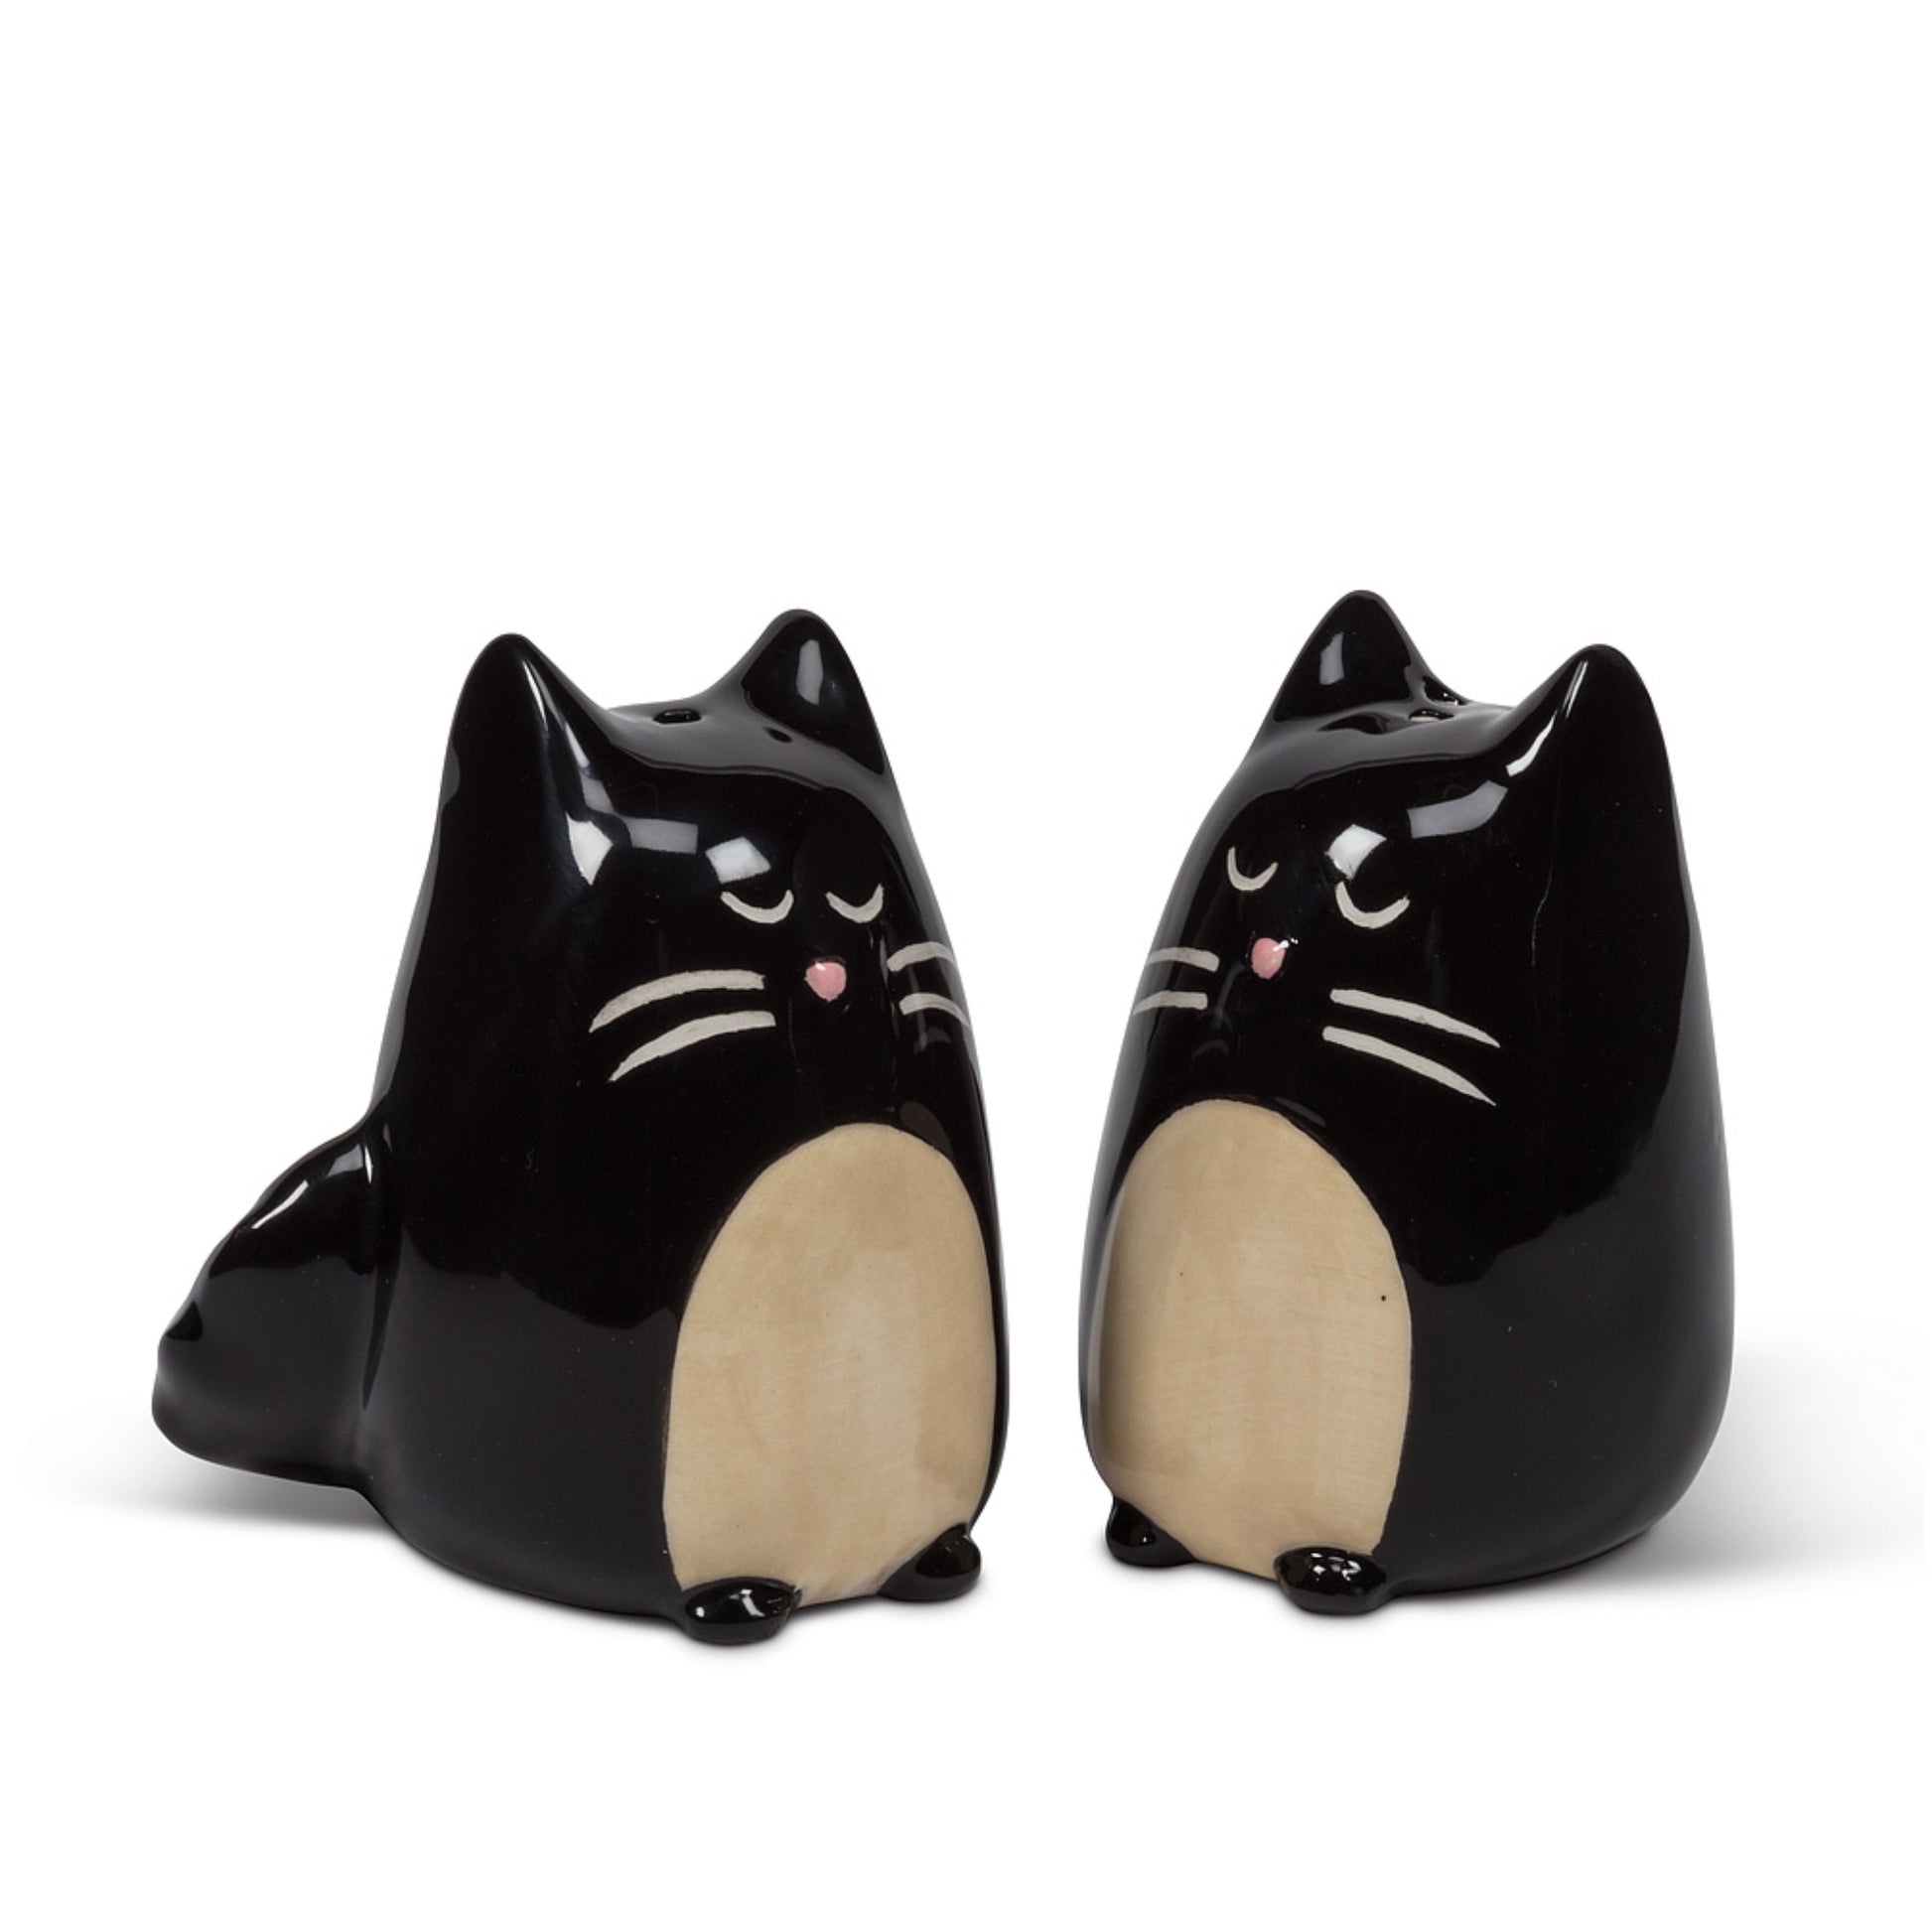 Salt & Pepper Shakers "Little Cat Duo" - Tiny Tiger Gift Shop